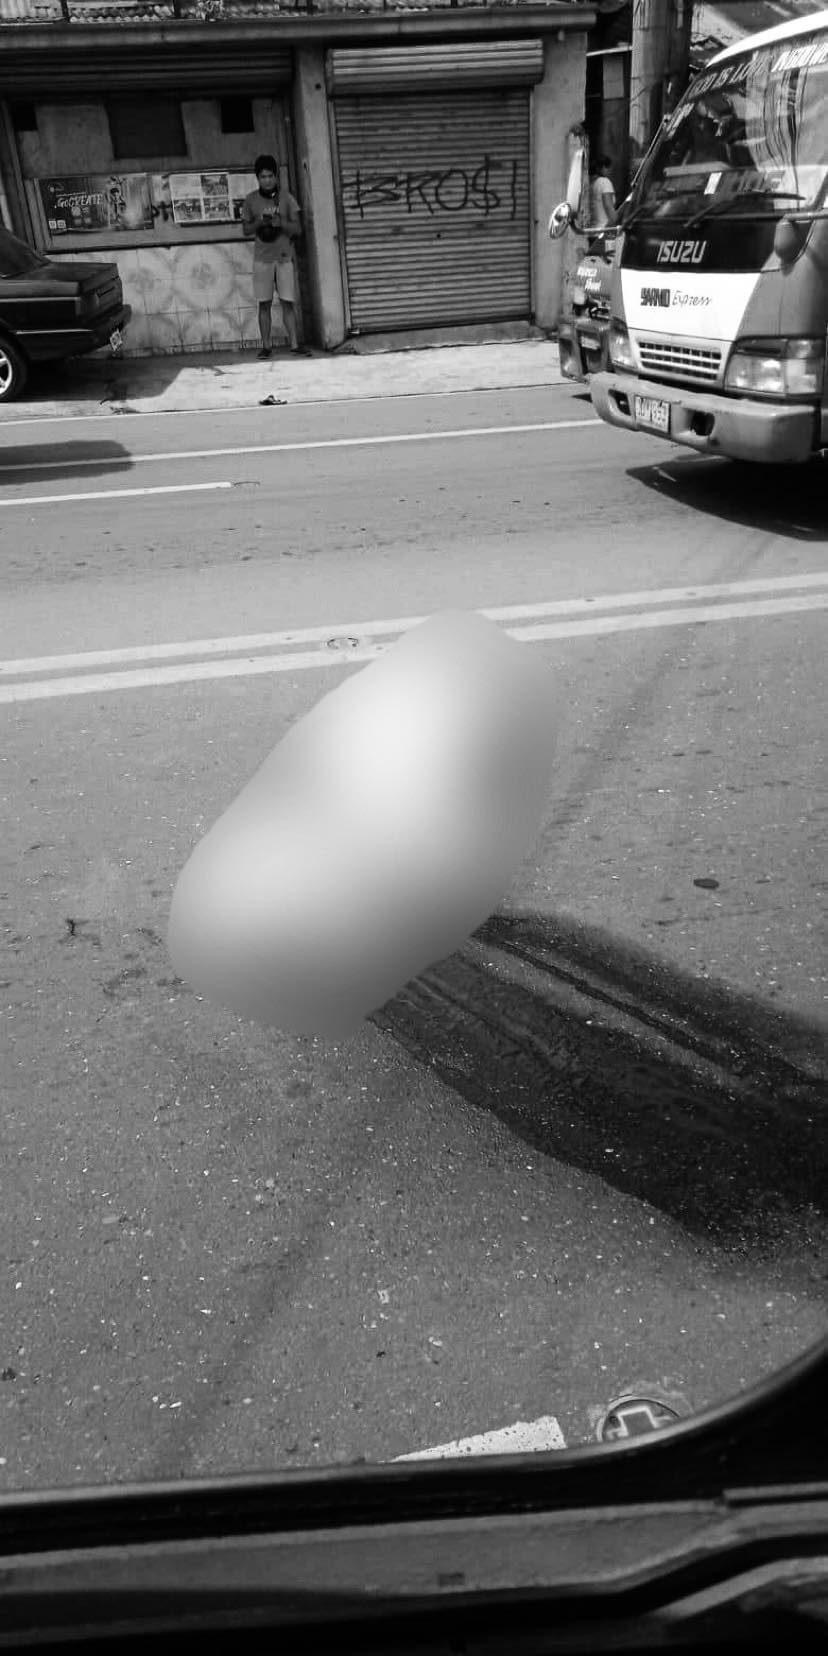 Speeding student on motorcycle tries to make it to exams, hits old man, lands in jail instead. In photo is the victim (blurred) lying on the street after the accident. | Contributed photo